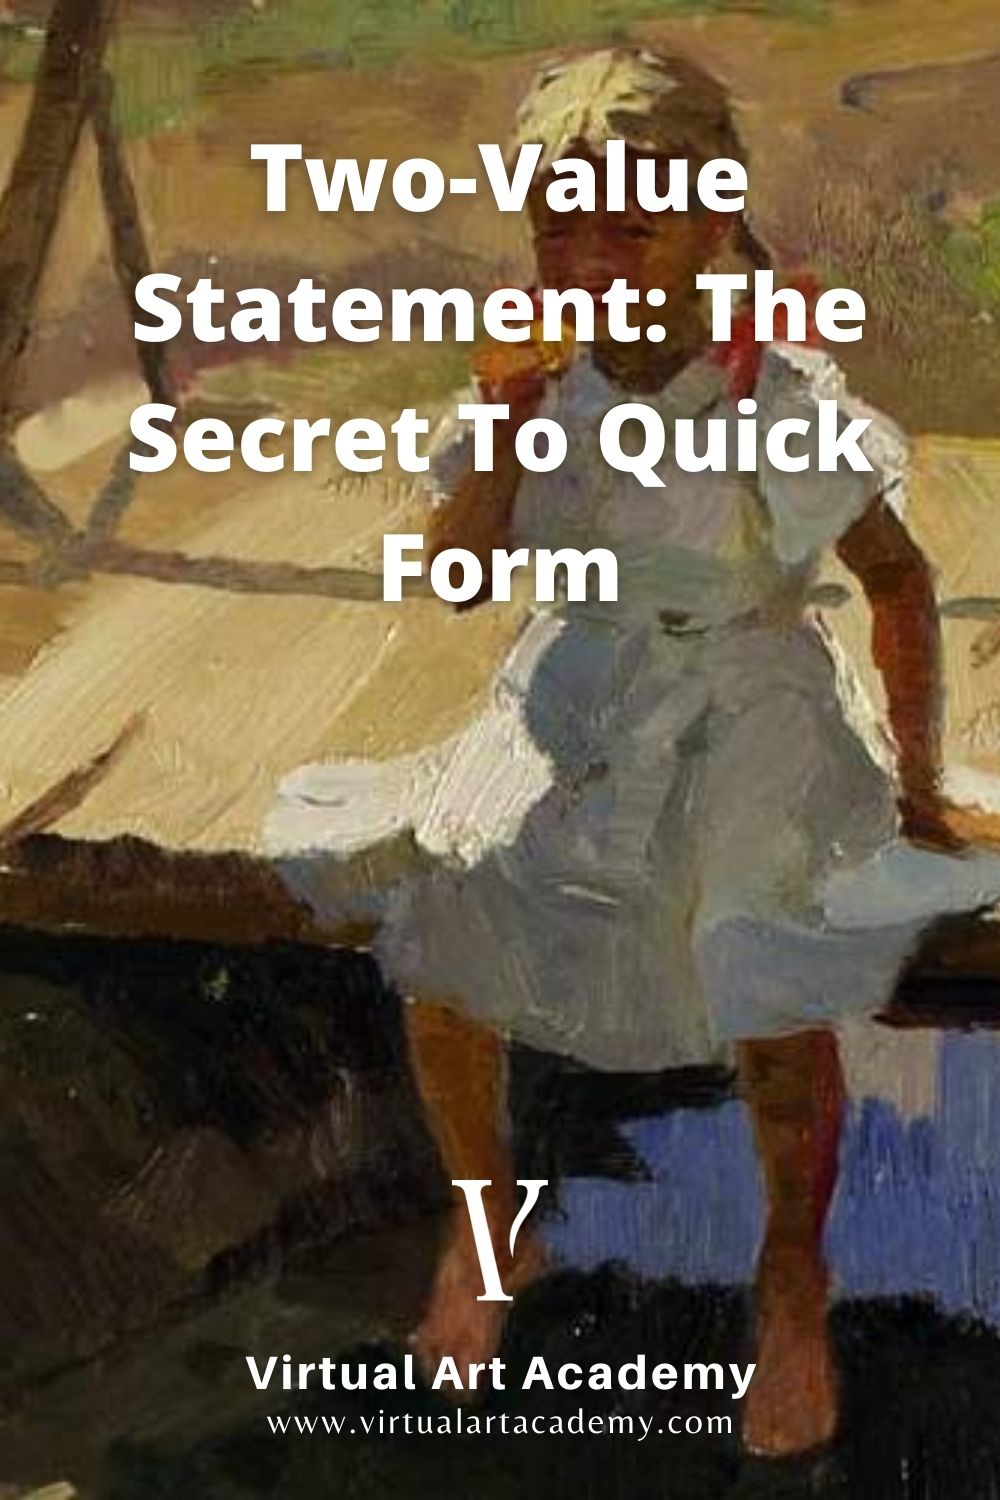 Two-Value Statement: The Secret To Quick Form